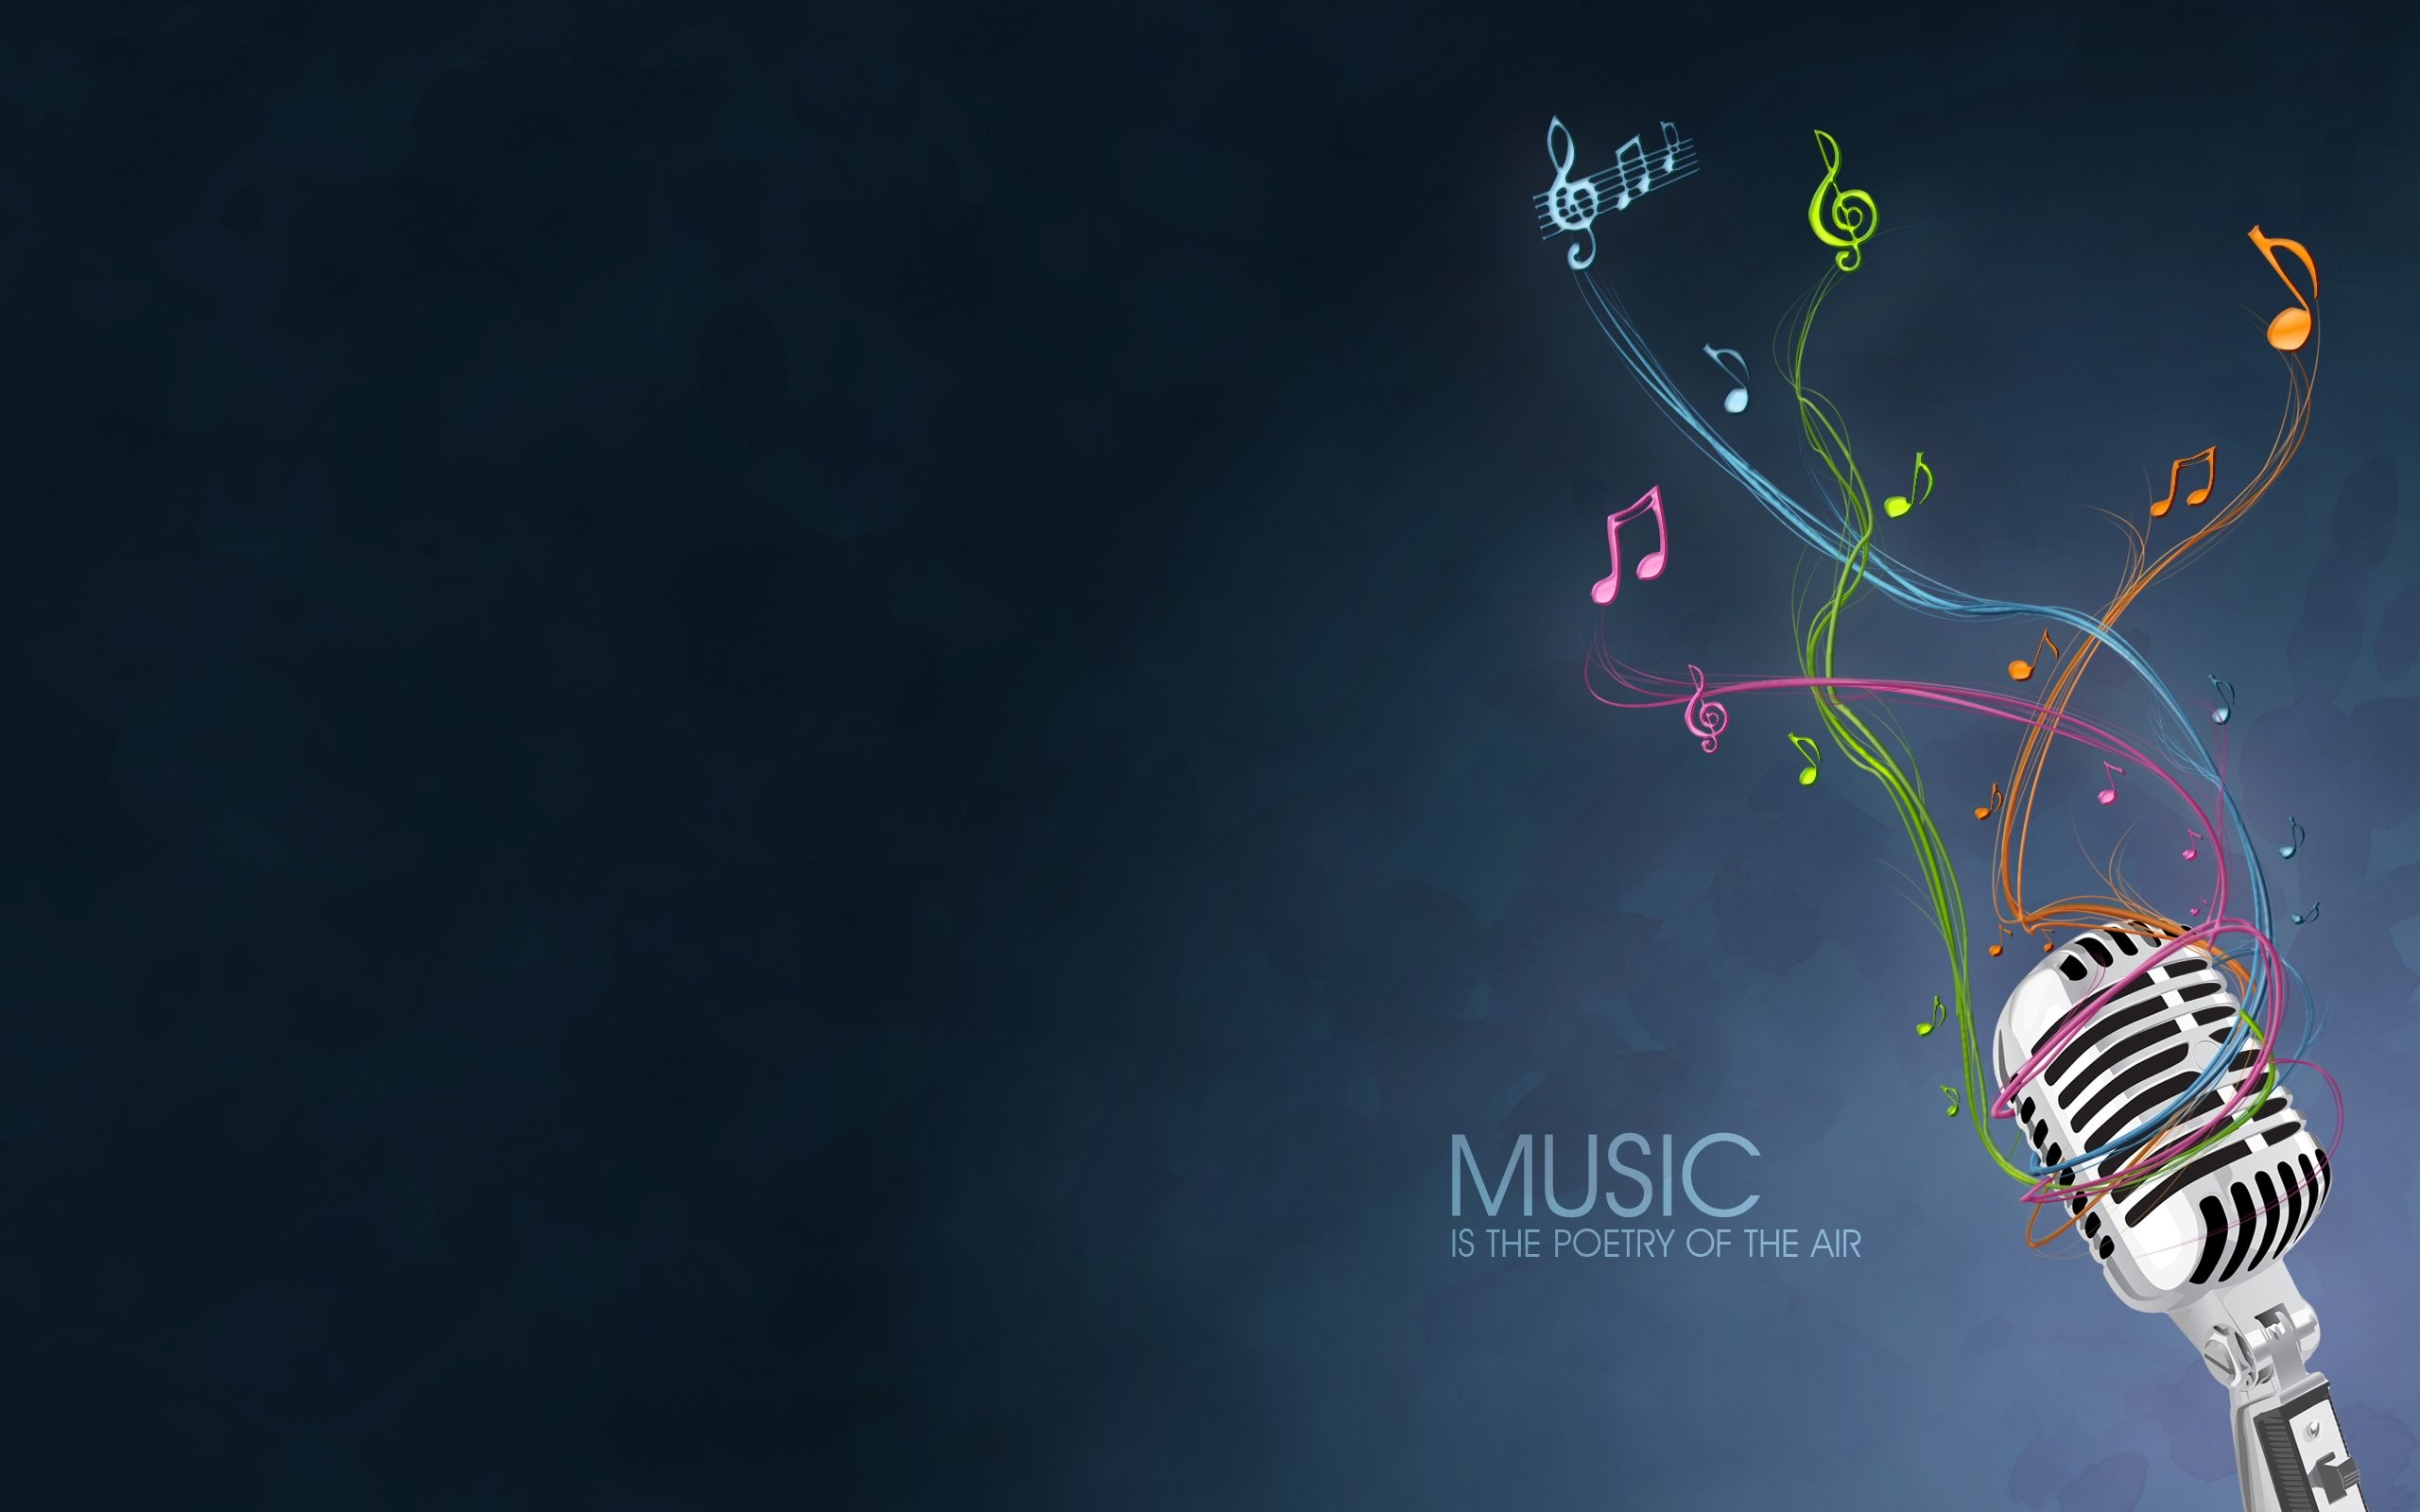 2560x1600 Music Notes Wallpaper 9815 Hd Wallpapers in Music Imagescicom 